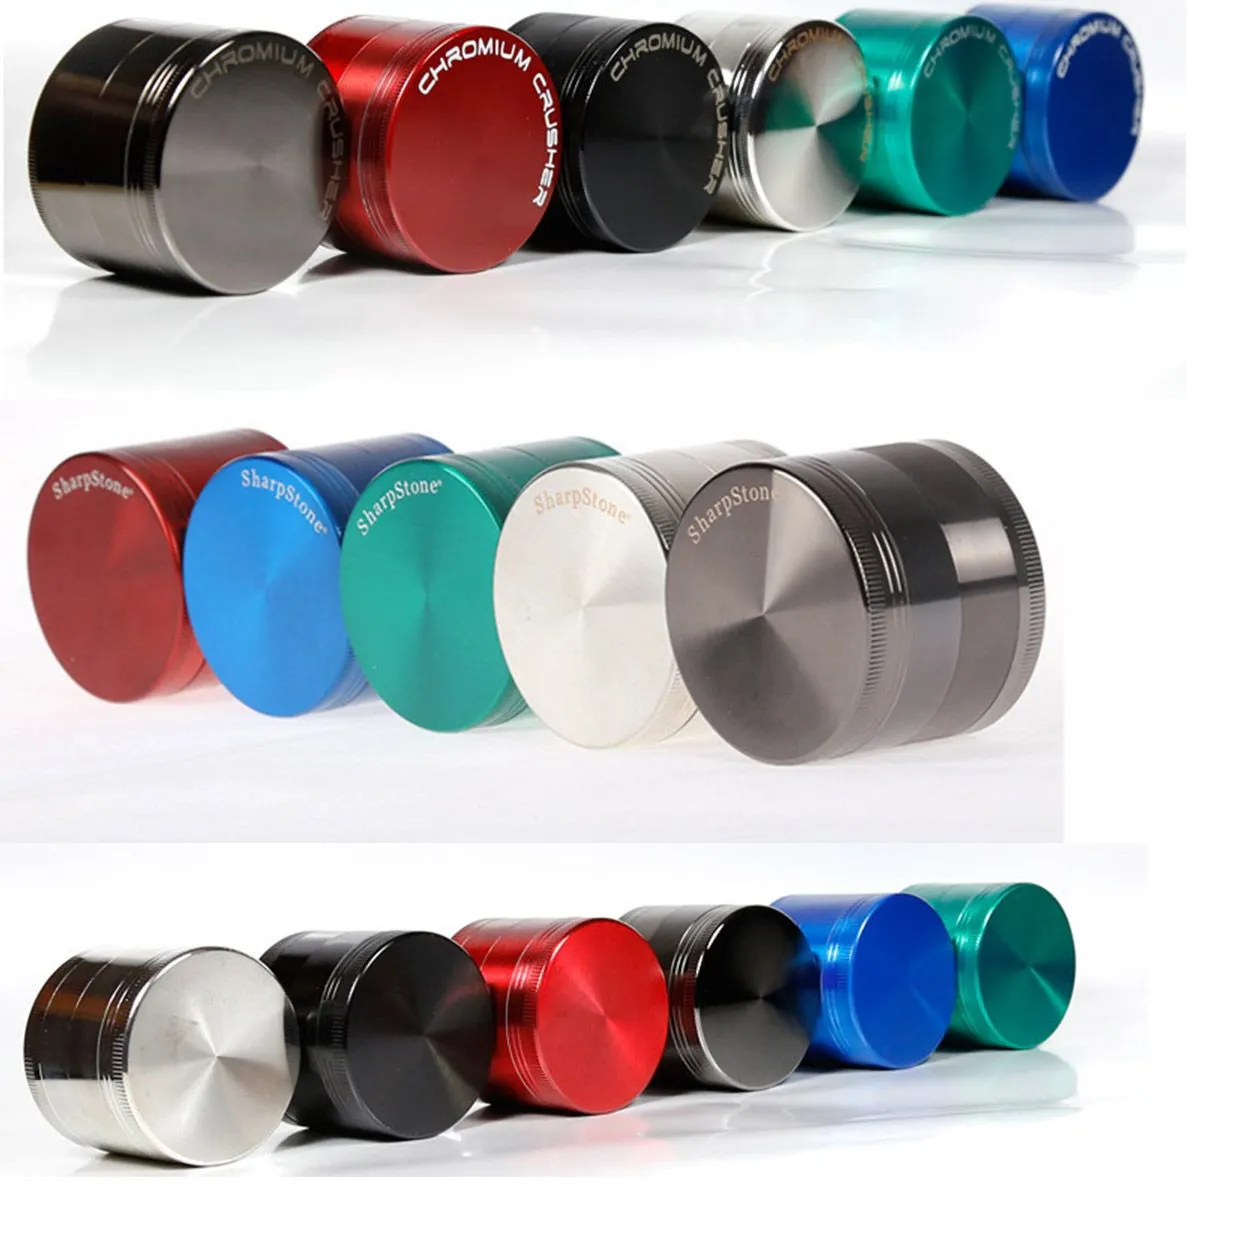 Sharpstone Grinder Chromium Crusher Zinc Alloy 4 LAYER Powerful Grinder For Dry Herb with Muilty Colors and Sizes